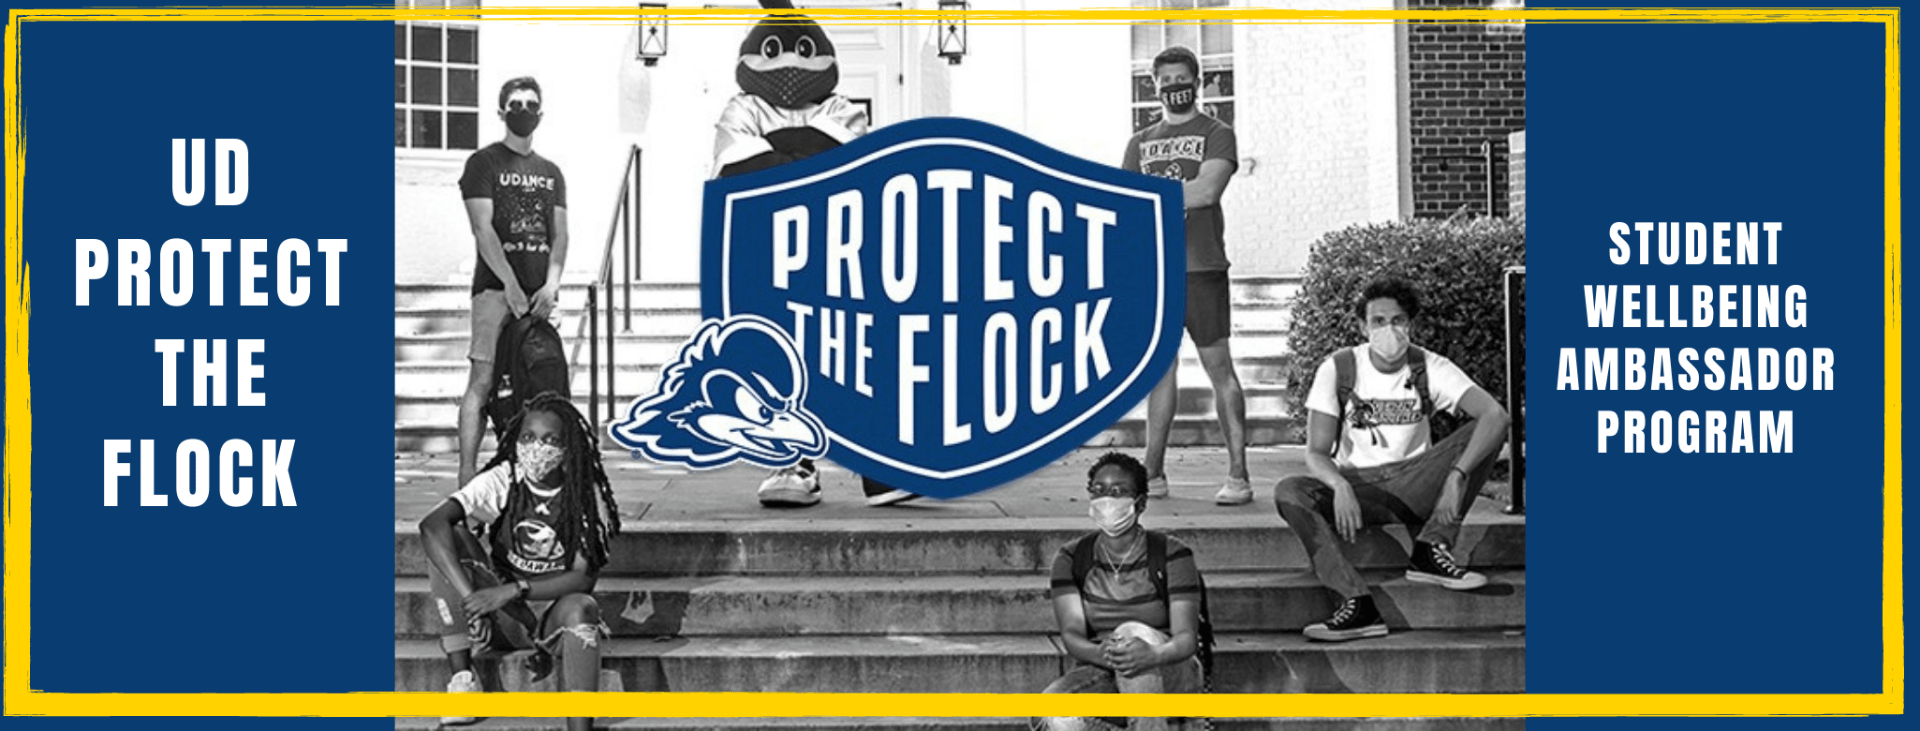 promo banner for new amabassdor program with students and YoUDee wearing masks supporting the protect the flock campaign to reduce covid-19 spread